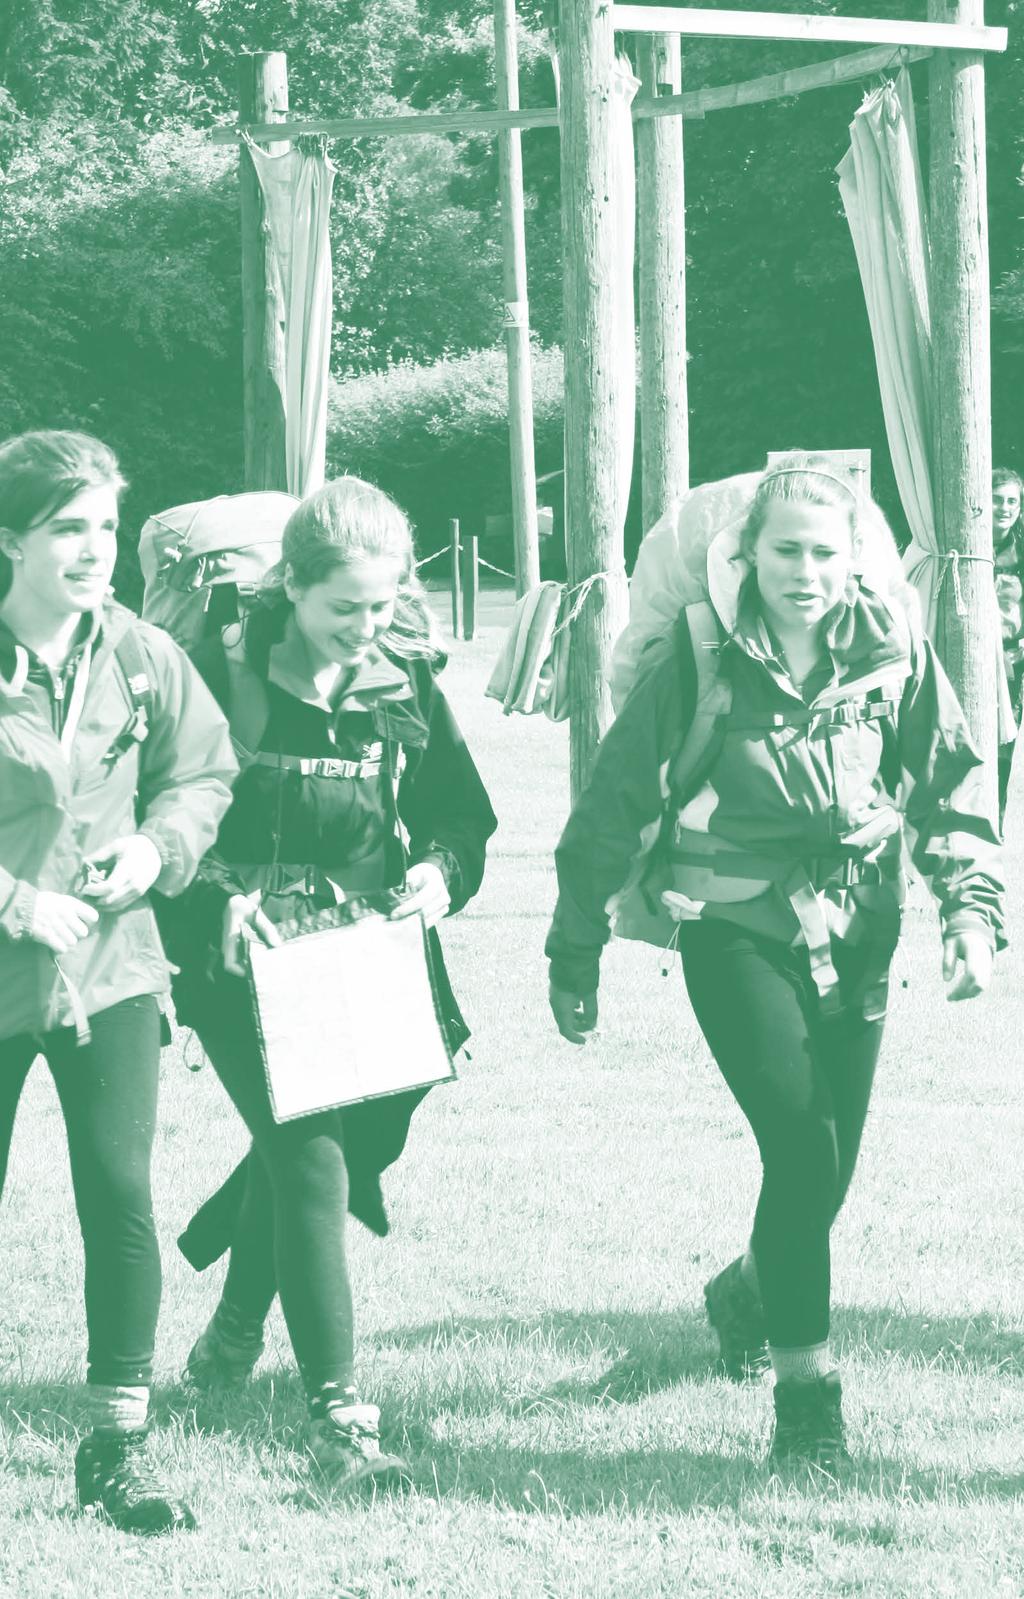 THE DUKE OF EDINBURGH AWARD SCHEME Many girls take part in a range of school organised practical activities and expeditions which enable them to qualify for Duke of Edinburgh Awards at all levels.